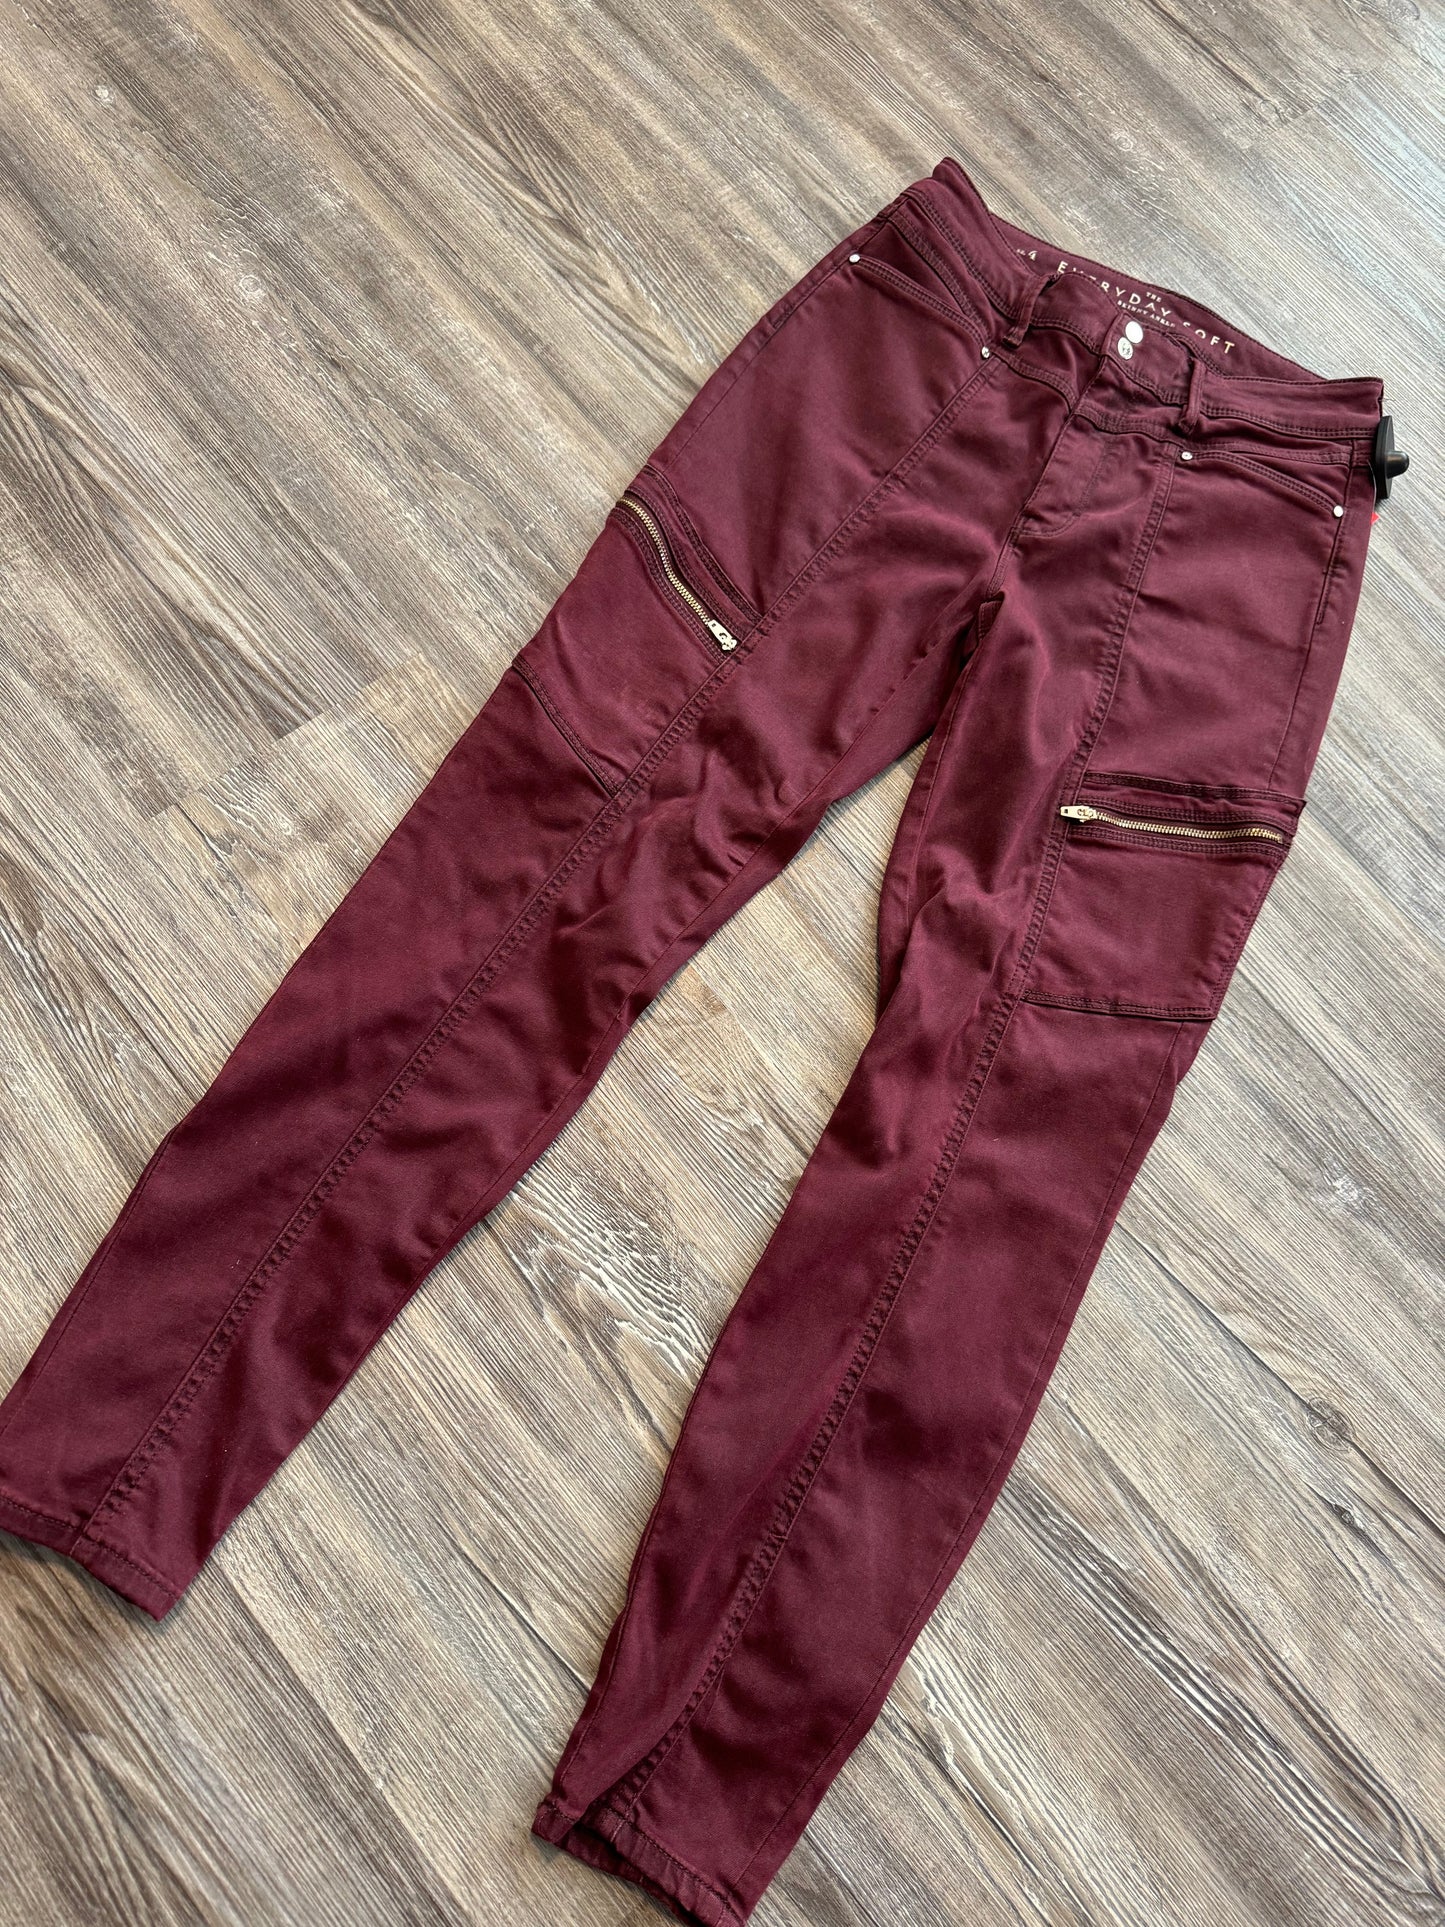 Jeans Relaxed/boyfriend By White House Black Market  Size: 4